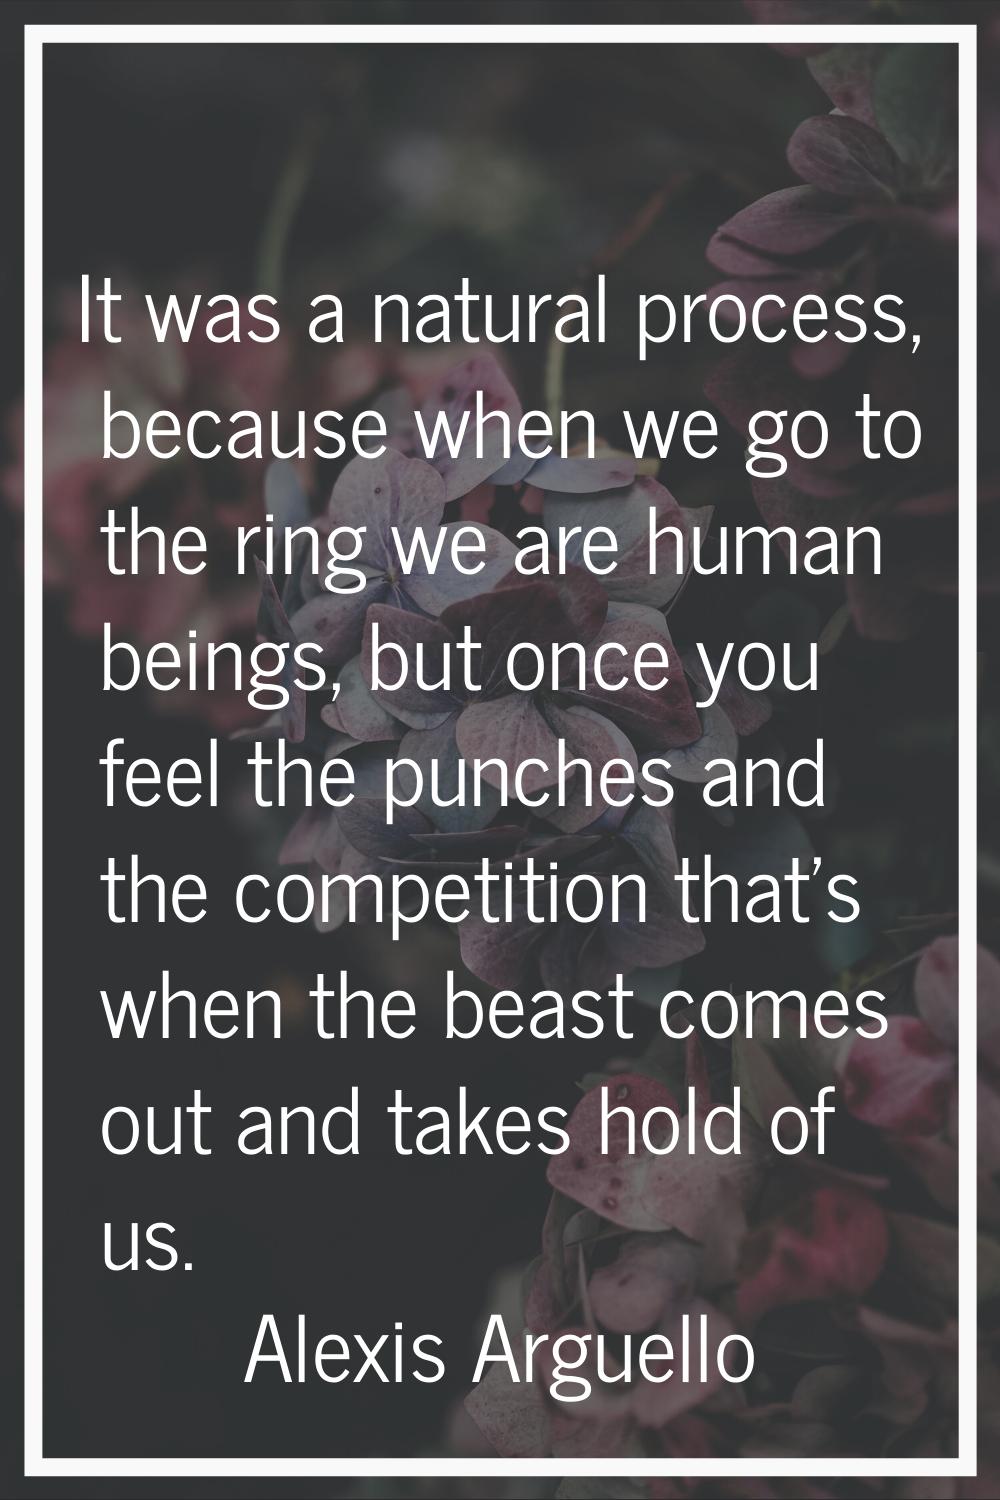 It was a natural process, because when we go to the ring we are human beings, but once you feel the